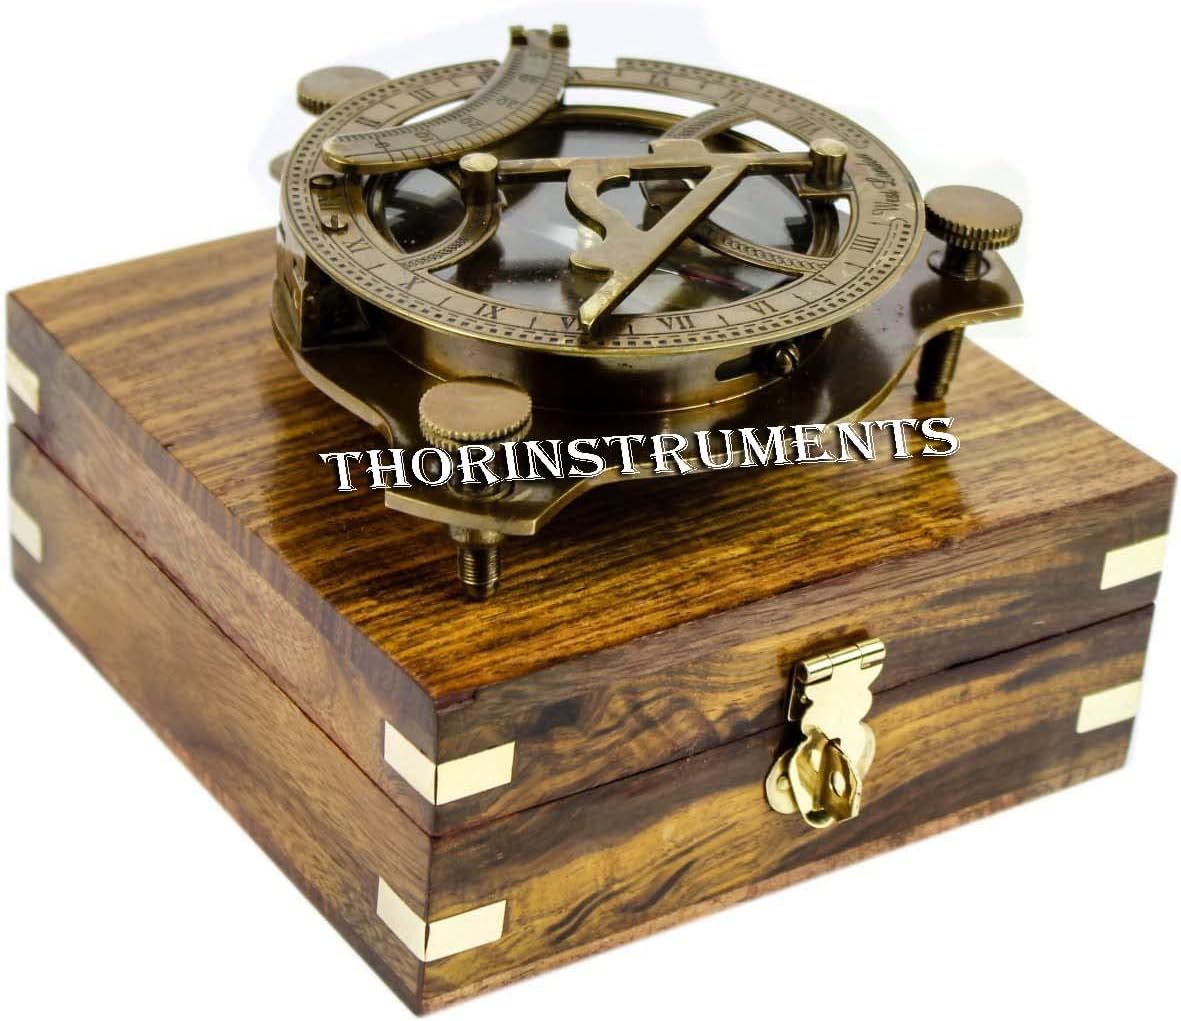 THOR INSTRUMENTS 5 Triangular Beautiful Nautical Sundial Compass with Level Meter Encased in Genuine Rosewood Anchor Inlaid Case Maritime Decor Gifts Rustic Vintage Home Decor Gifts